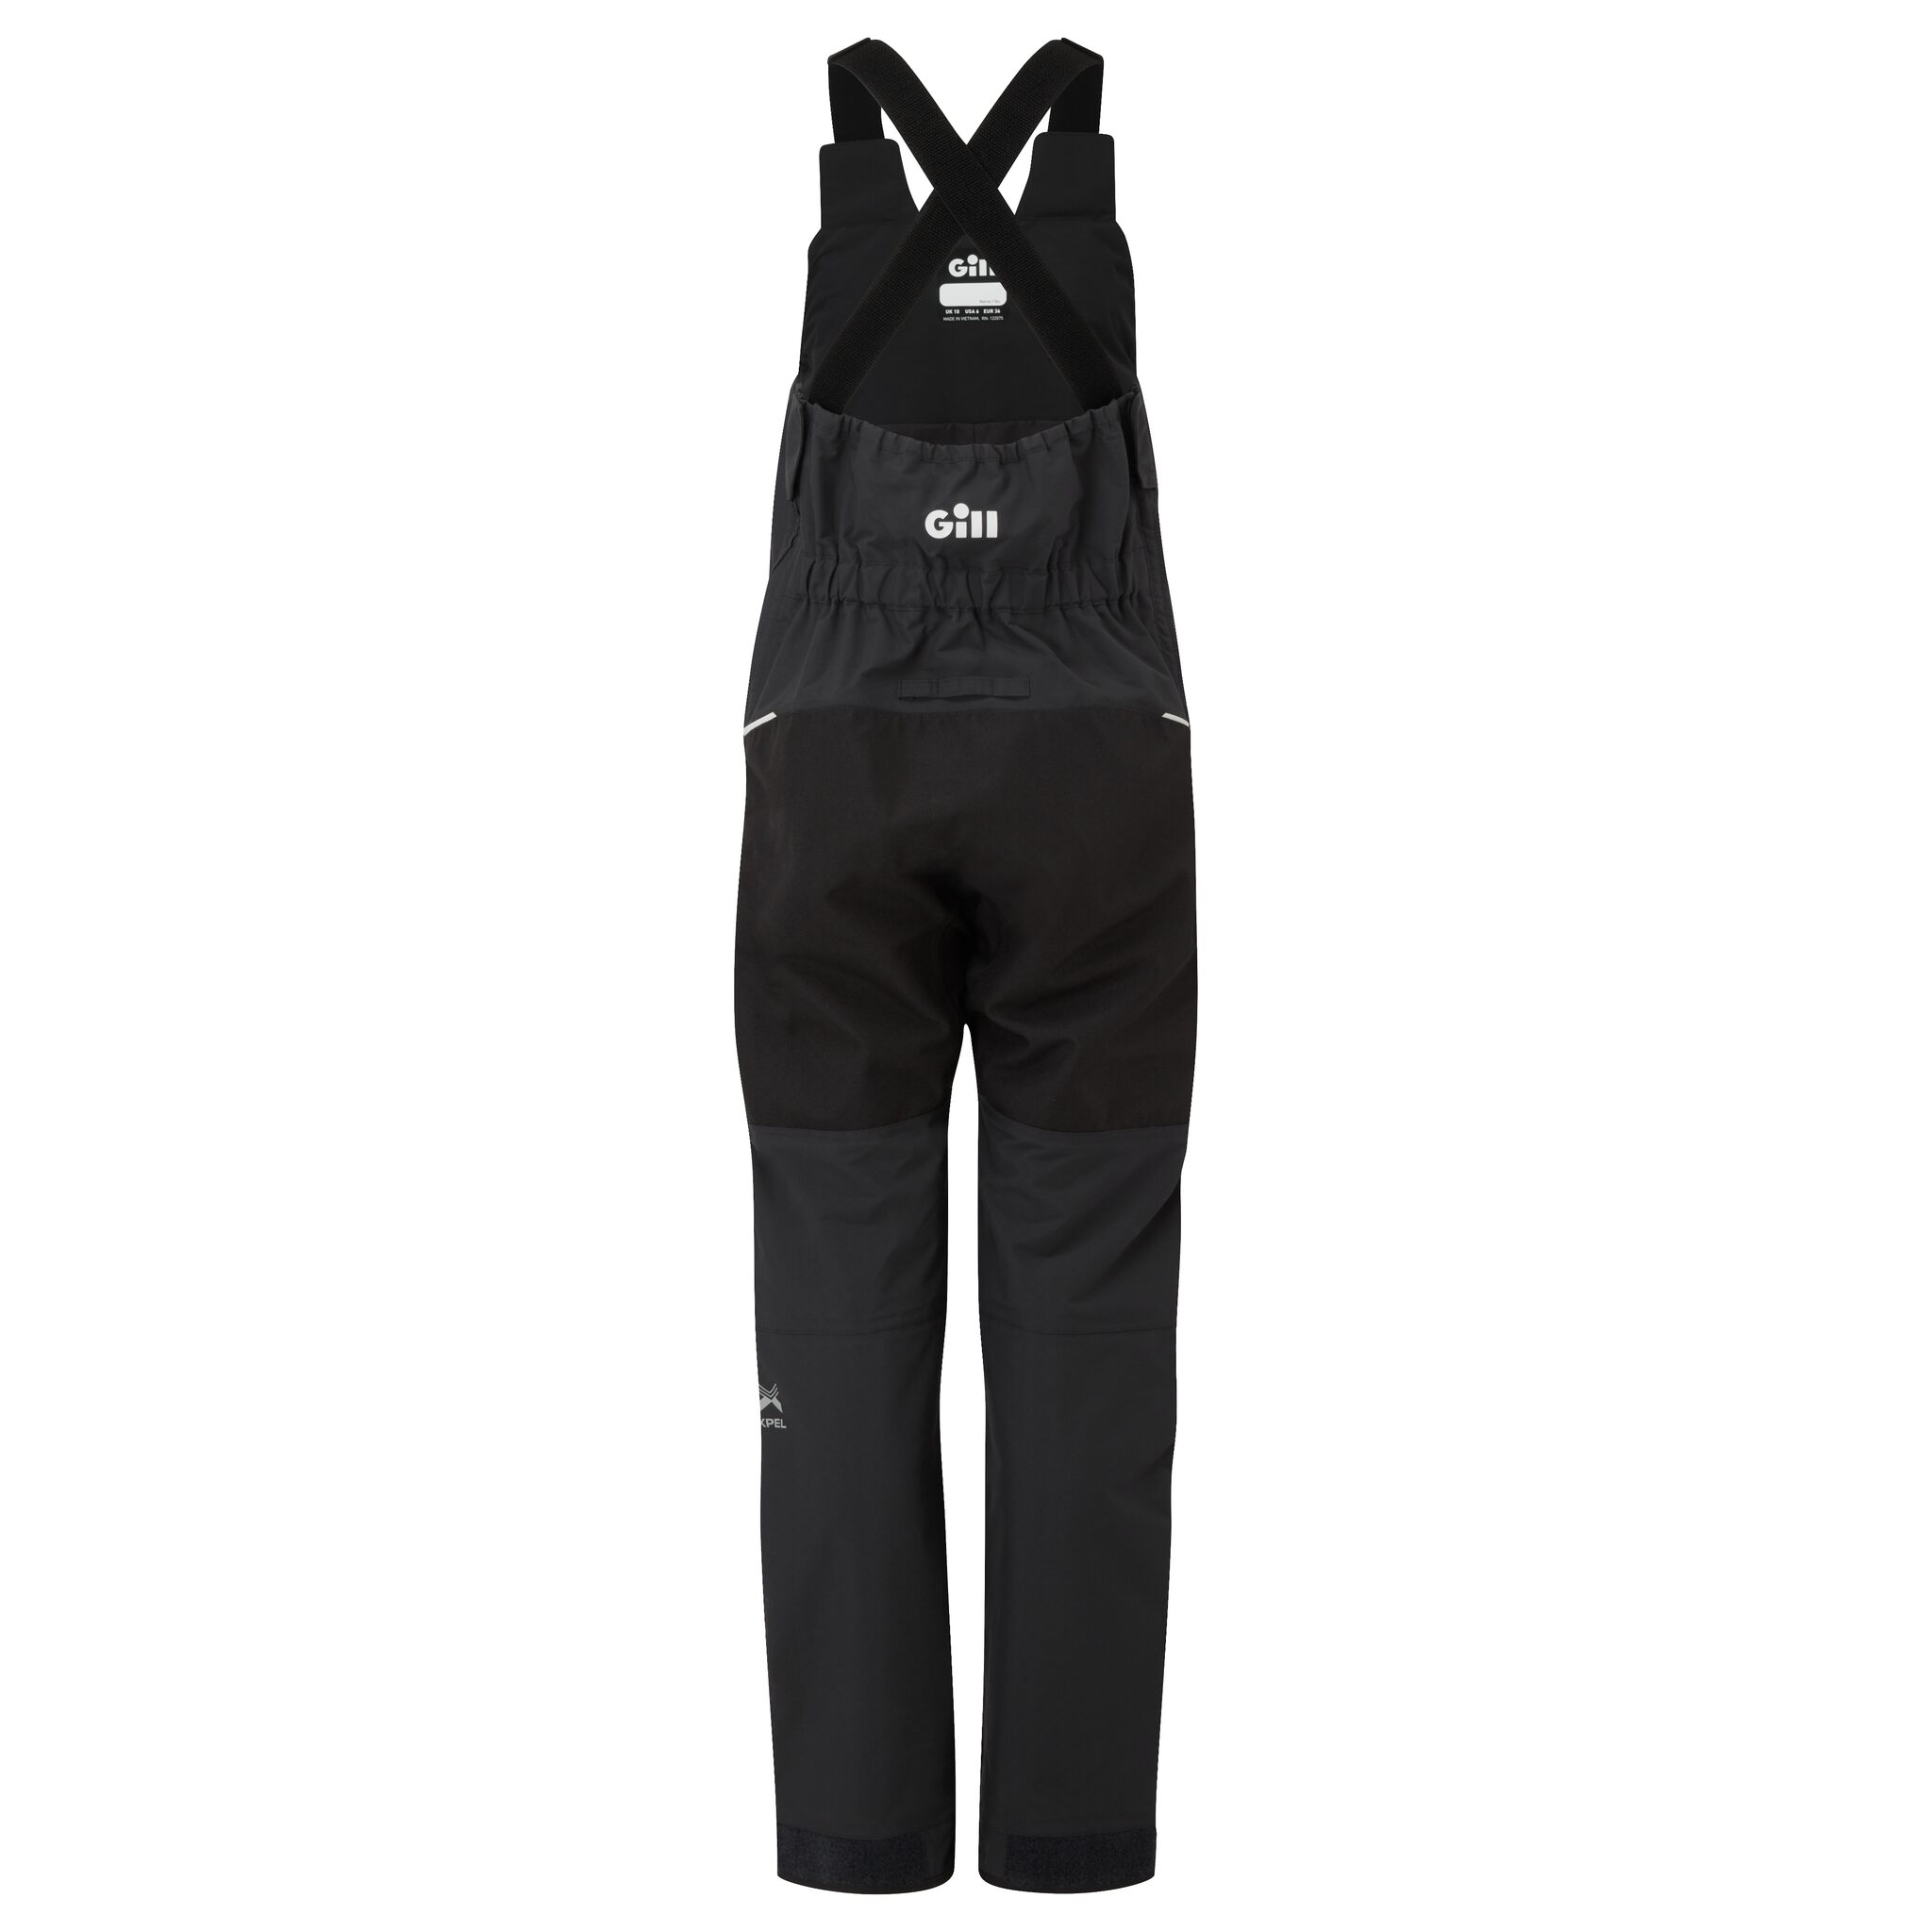 Gill ladies offshore pants OS25